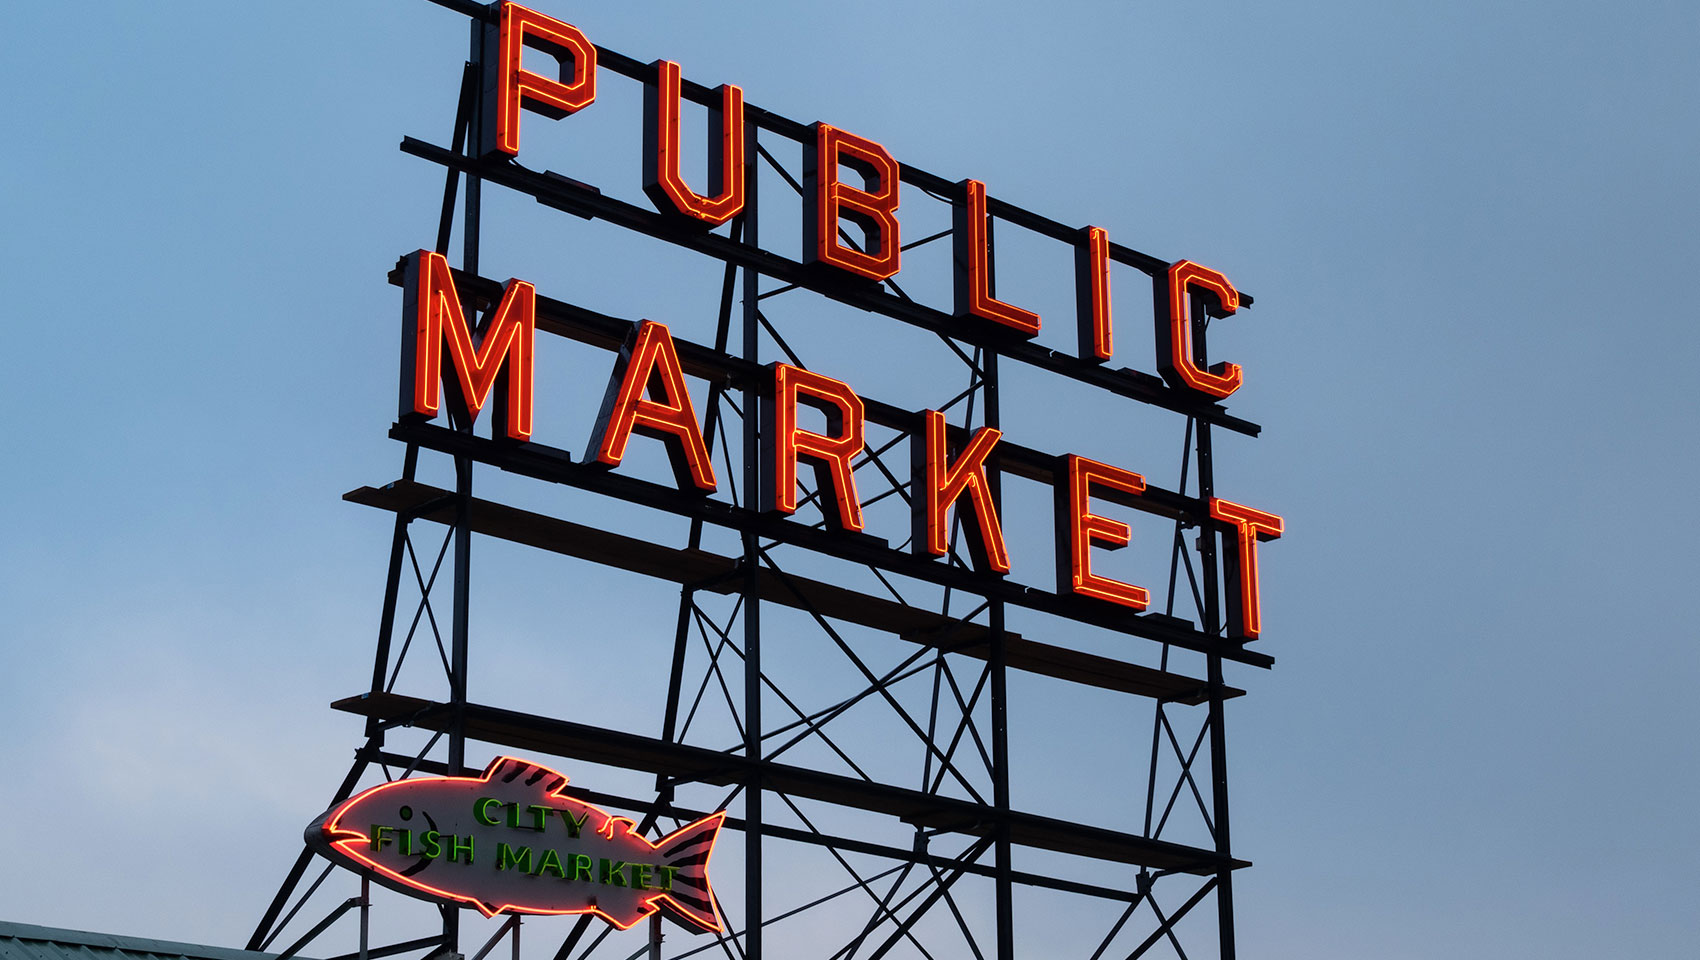 pike place fish market sign